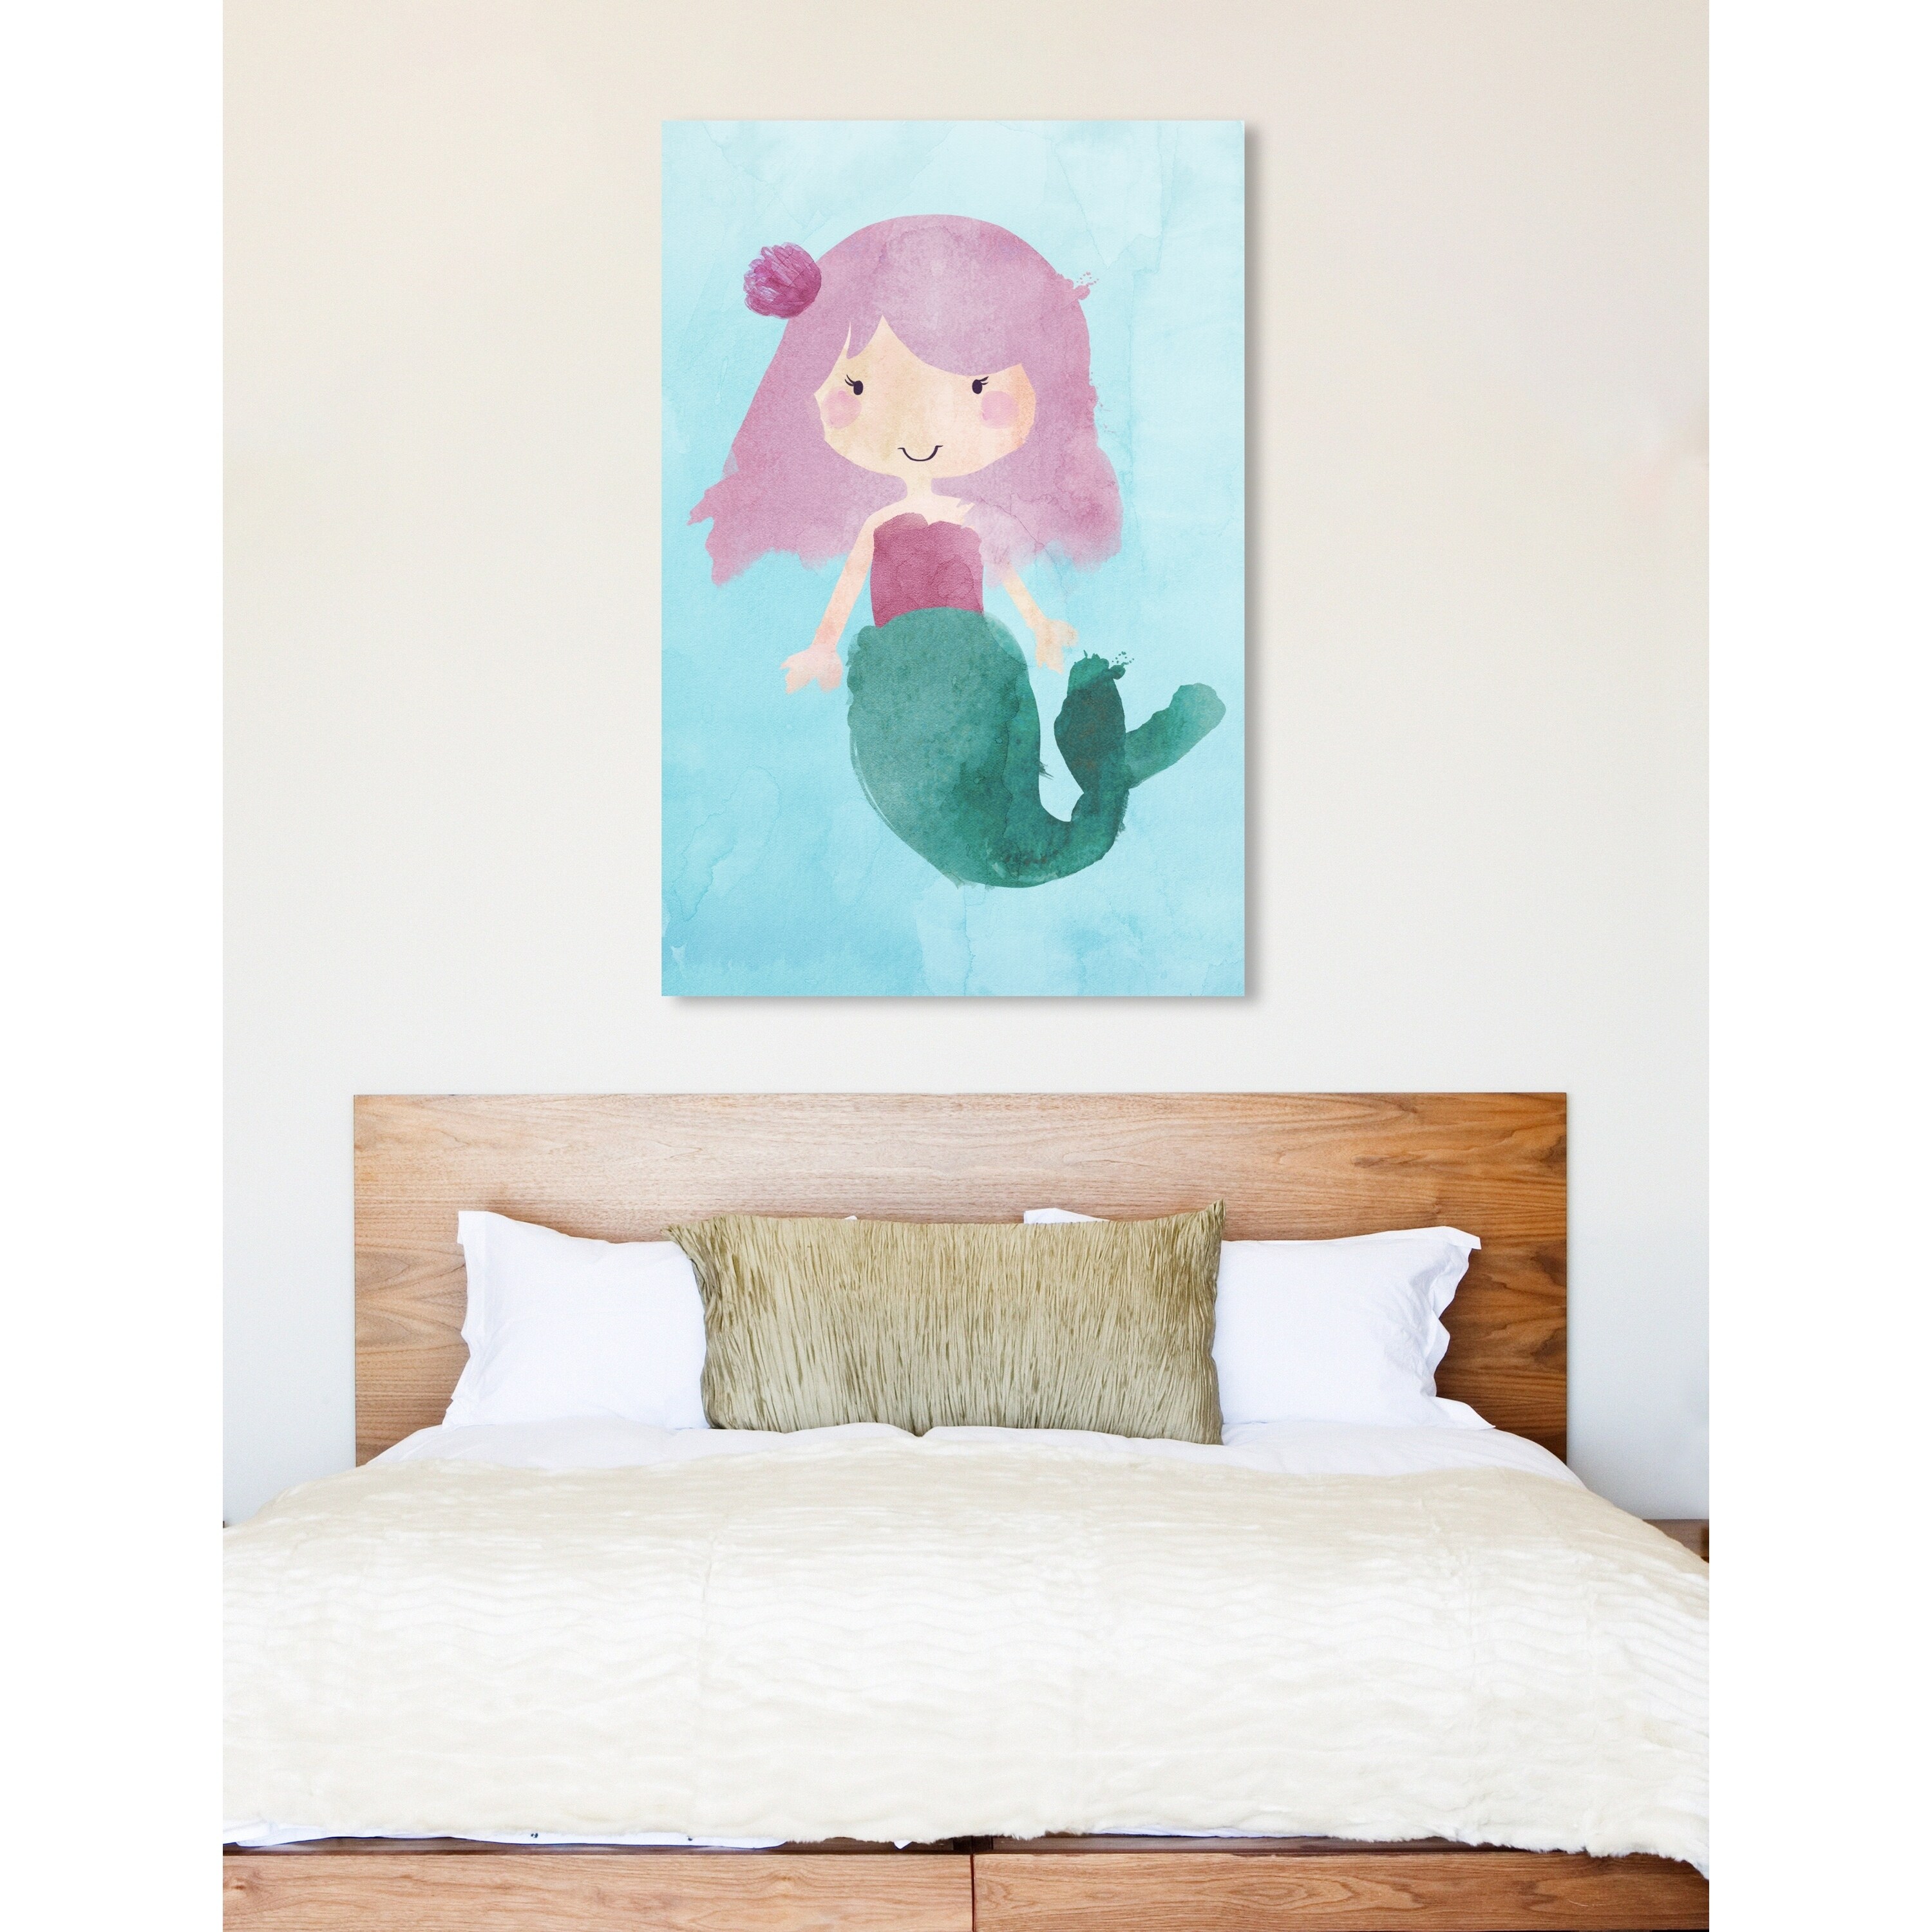 Oliver Gal Tiny Mermaid Watercolor Fantasy And Sci Fi Wall Art Canvas Print Blue Purple